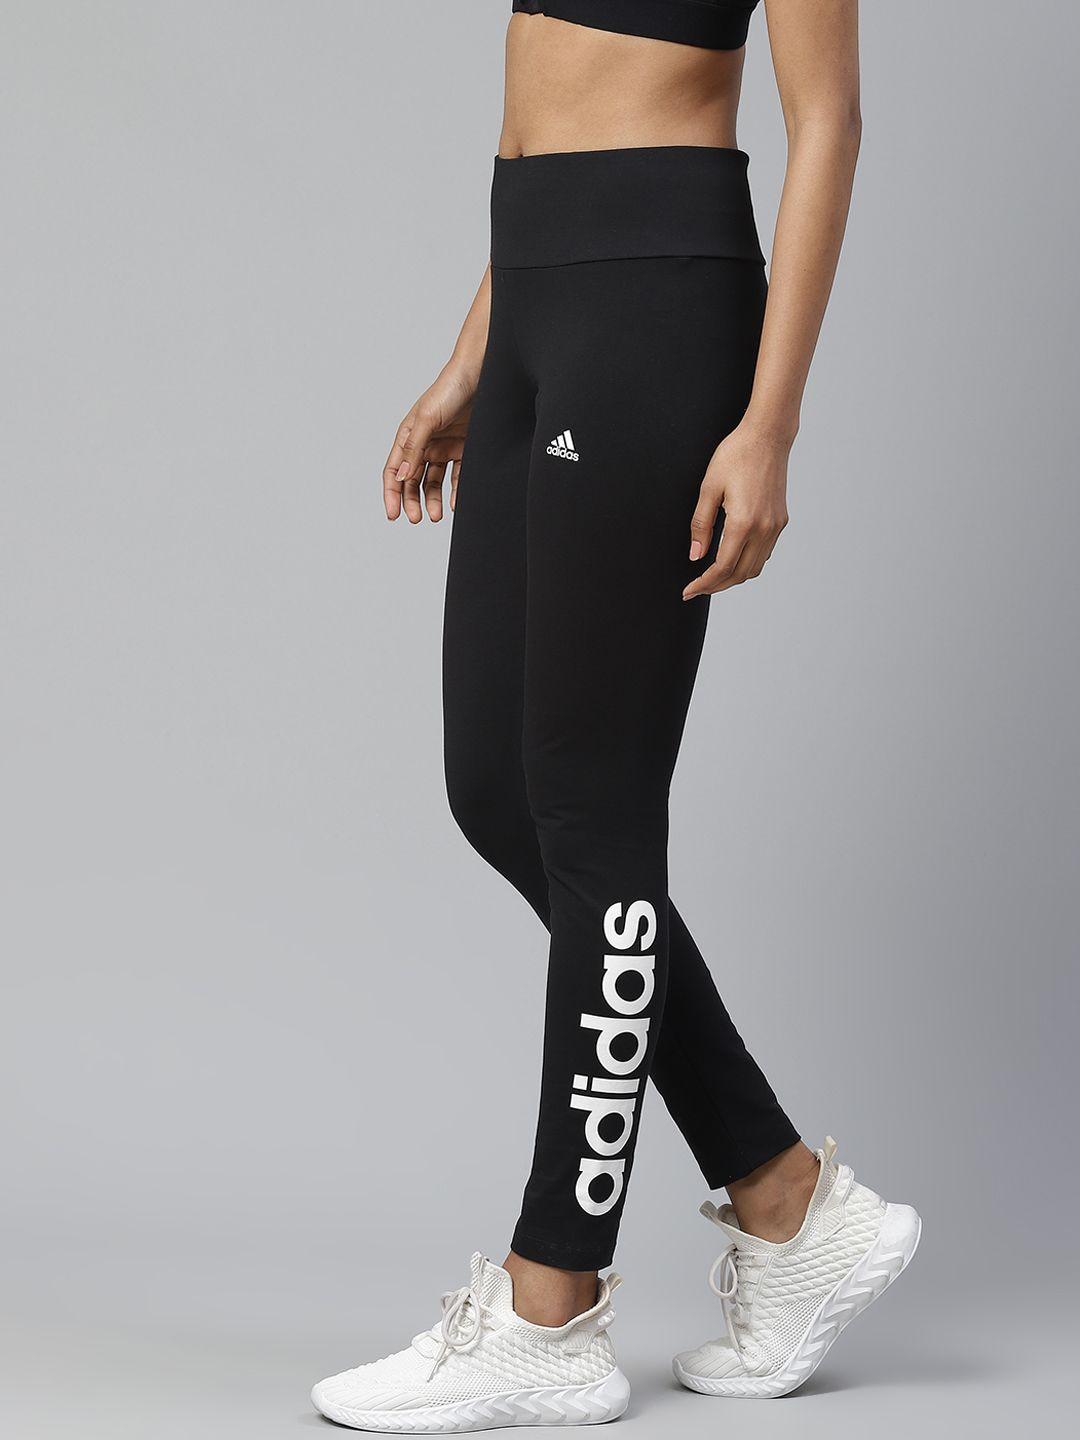 adidas women black & white printed detail loungewear essentials high-waisted logo sustainable tights